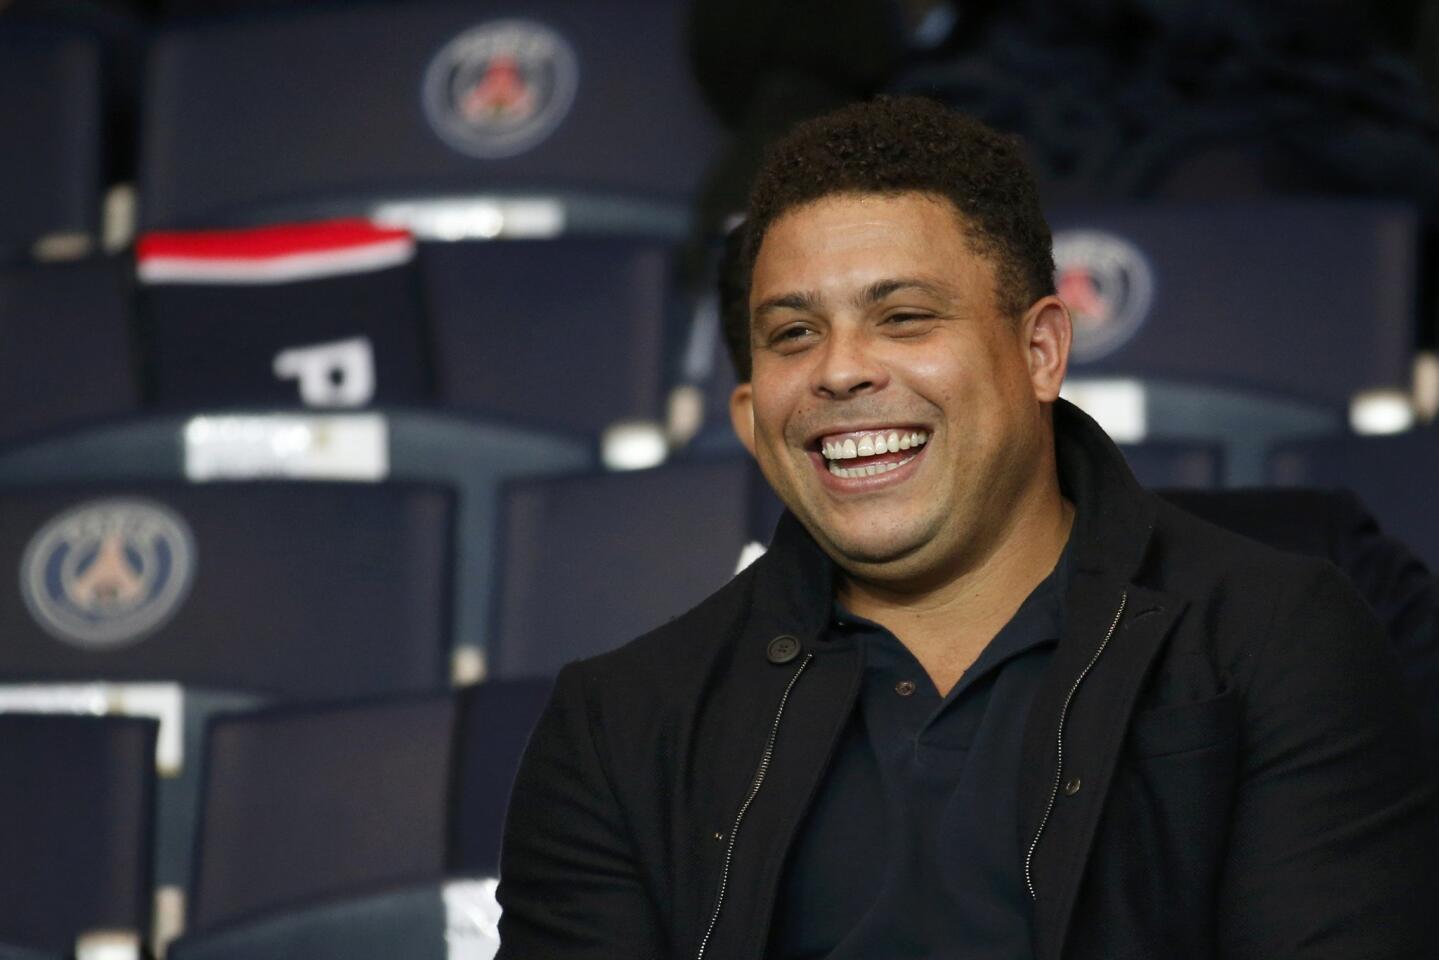 Former soccer player Ronaldo of Brazil attends the Champions League Group A soccer match where Paris Saint Germain face Real Madrid at the Parc des Princes stadium in Paris